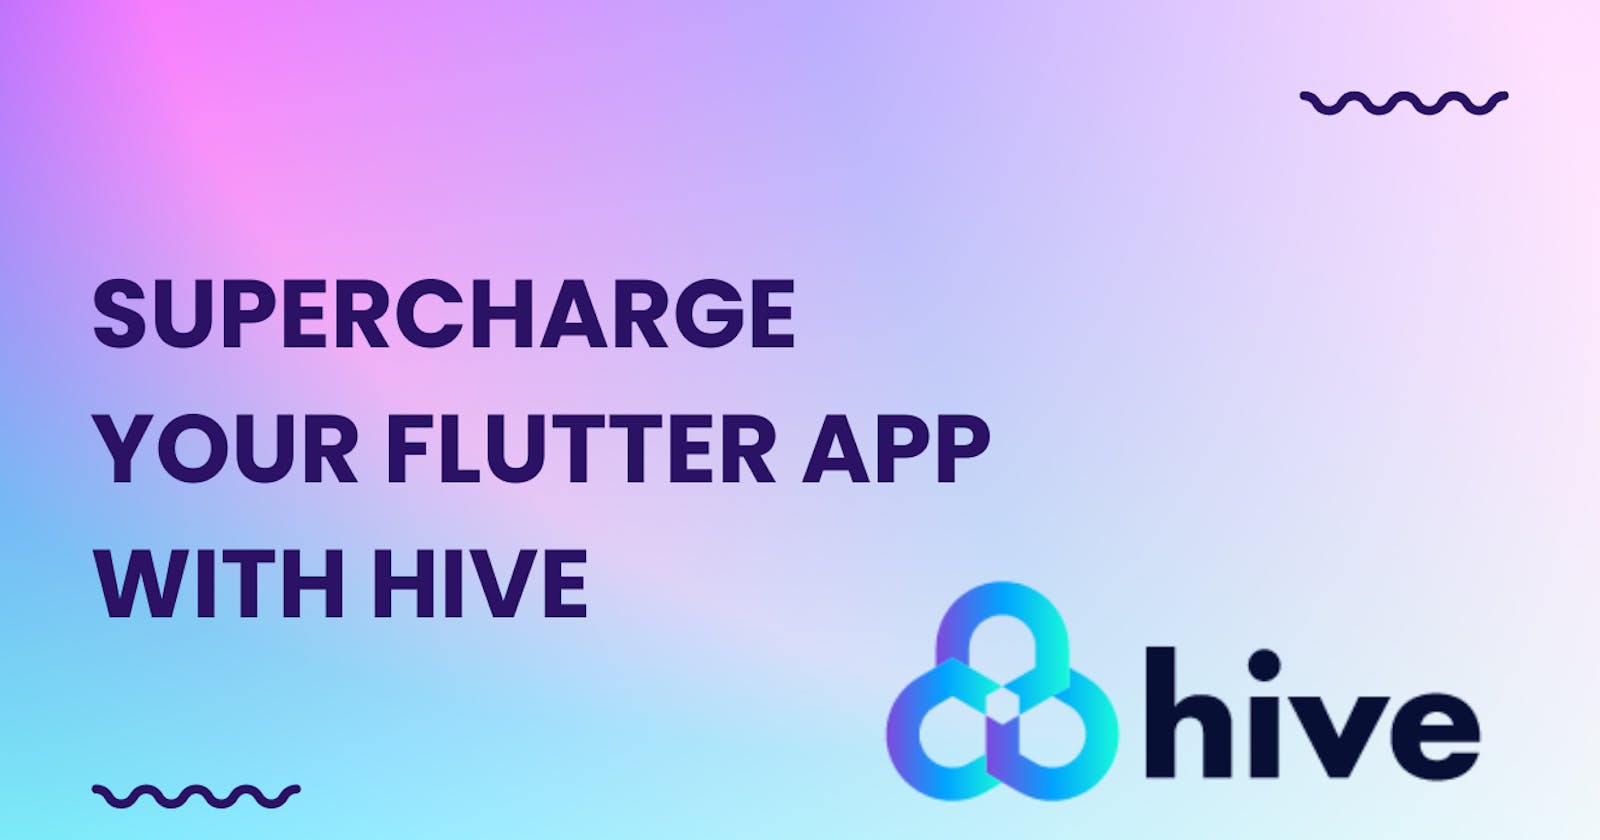 Supercharge Your Flutter App with Hive